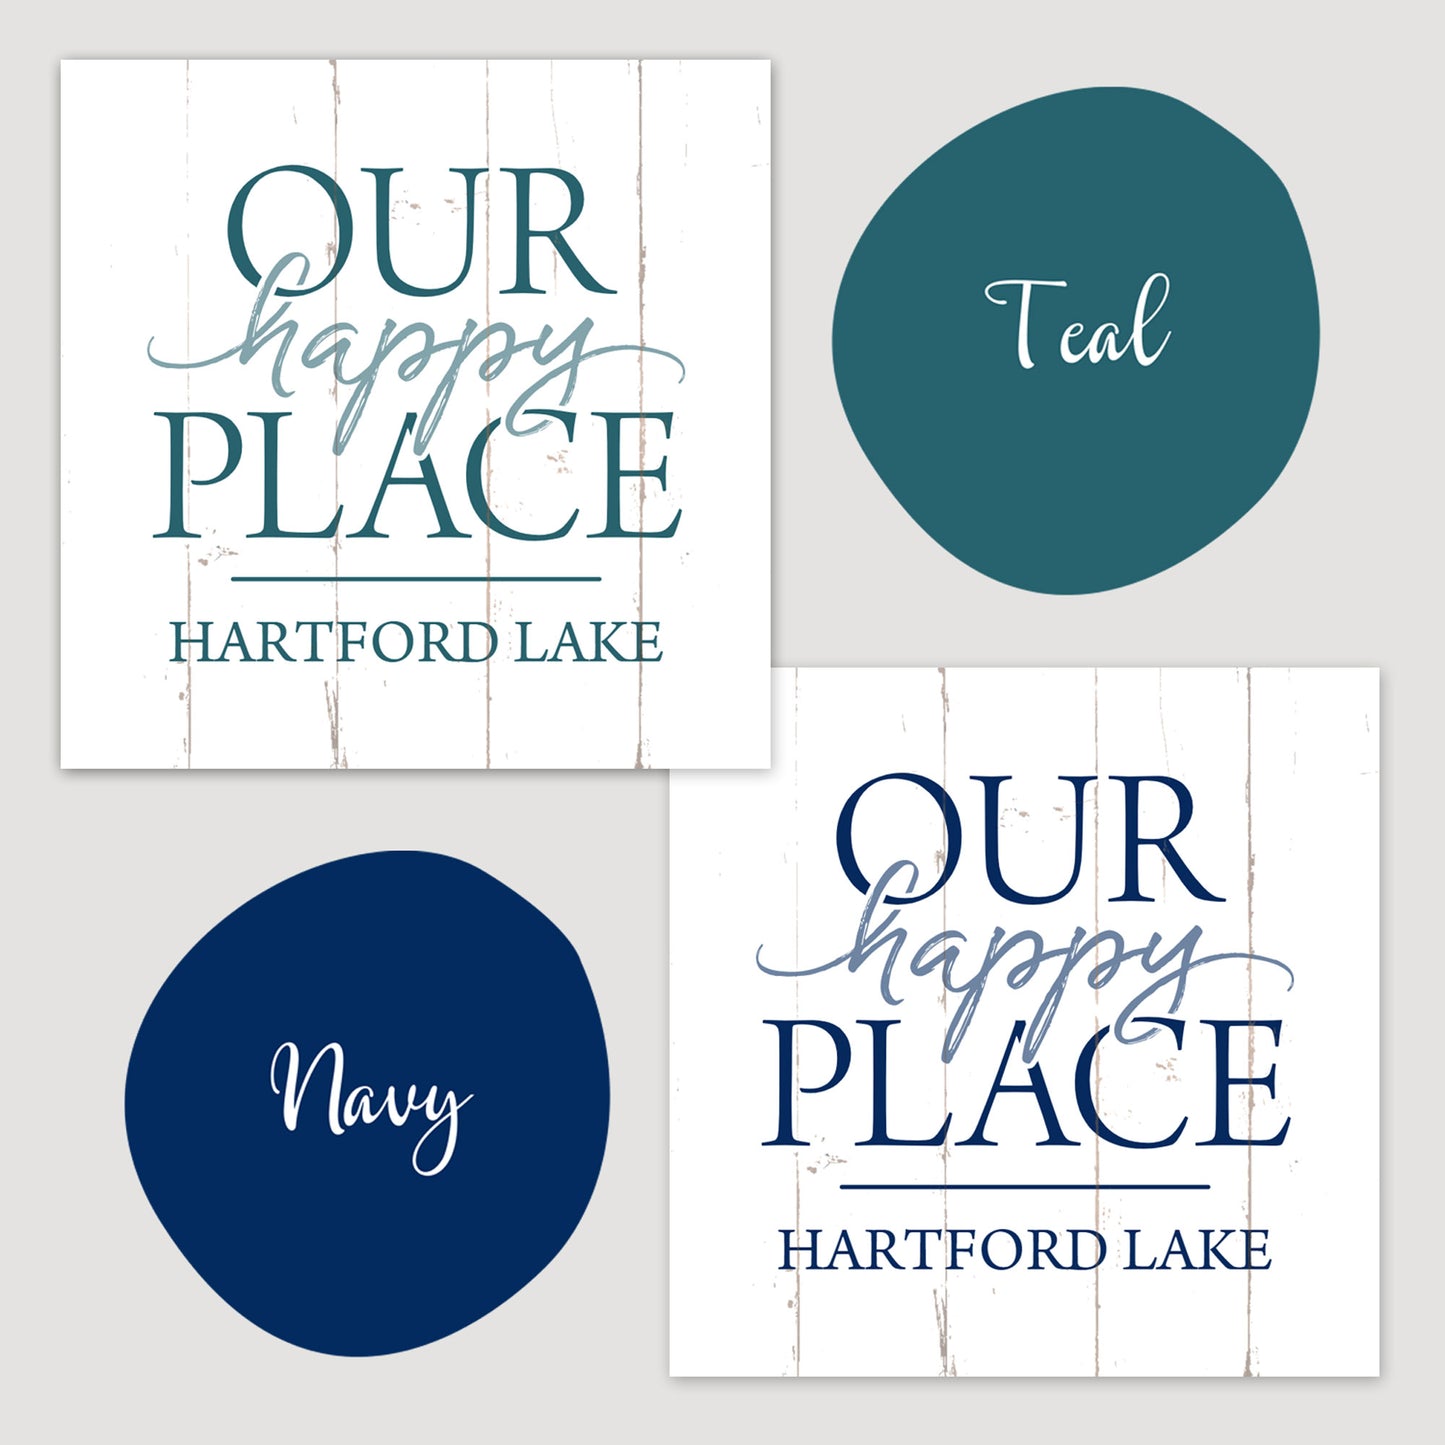 Our Happy Place - Custom Canvas Wall Sign - Lake House Home Decor